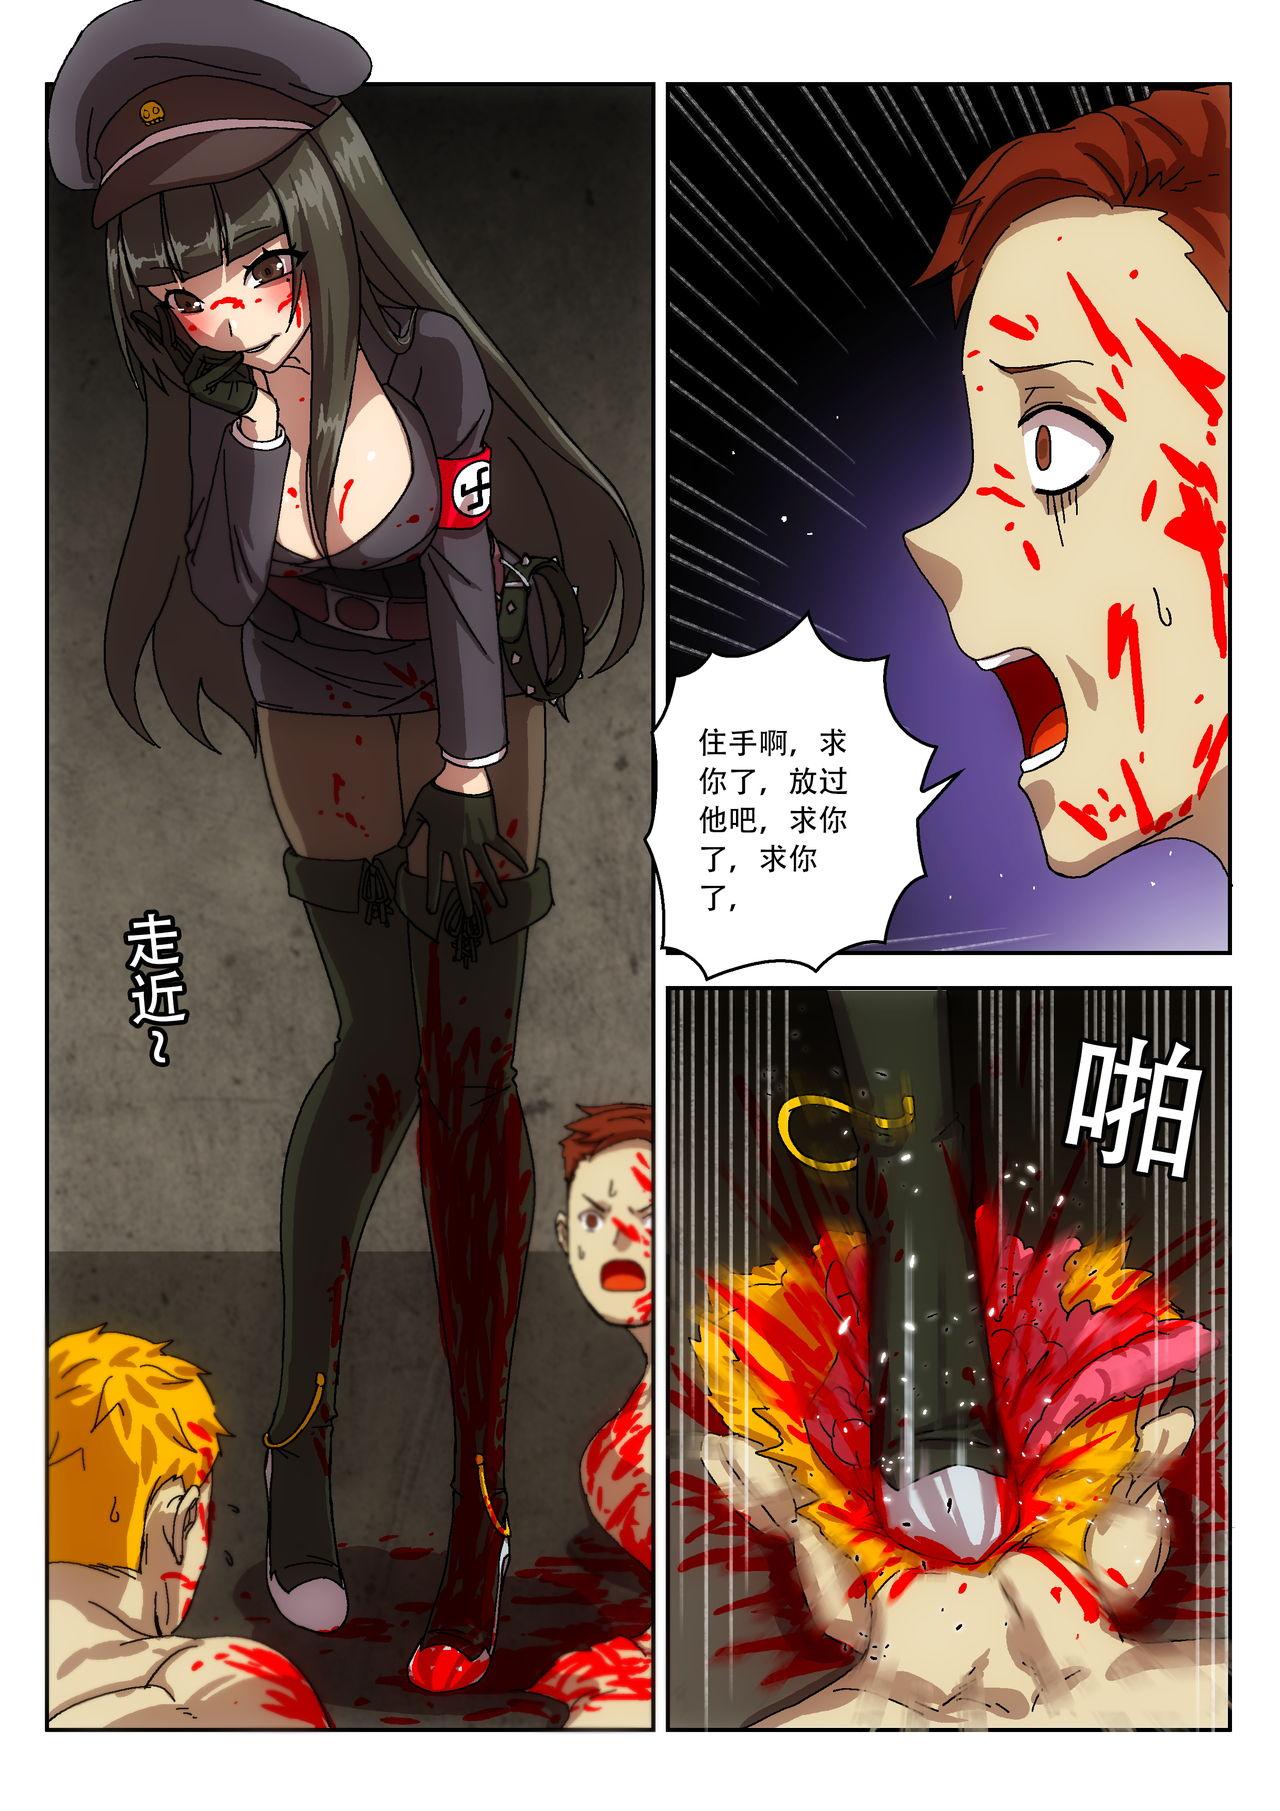 [Weixiefashi] Empire executioner Alice-sama's thigh-high boots trampling crushing torturing session full colour [帝国处刑官爱丽丝大人的长靴踩杀拷问][全彩] 16